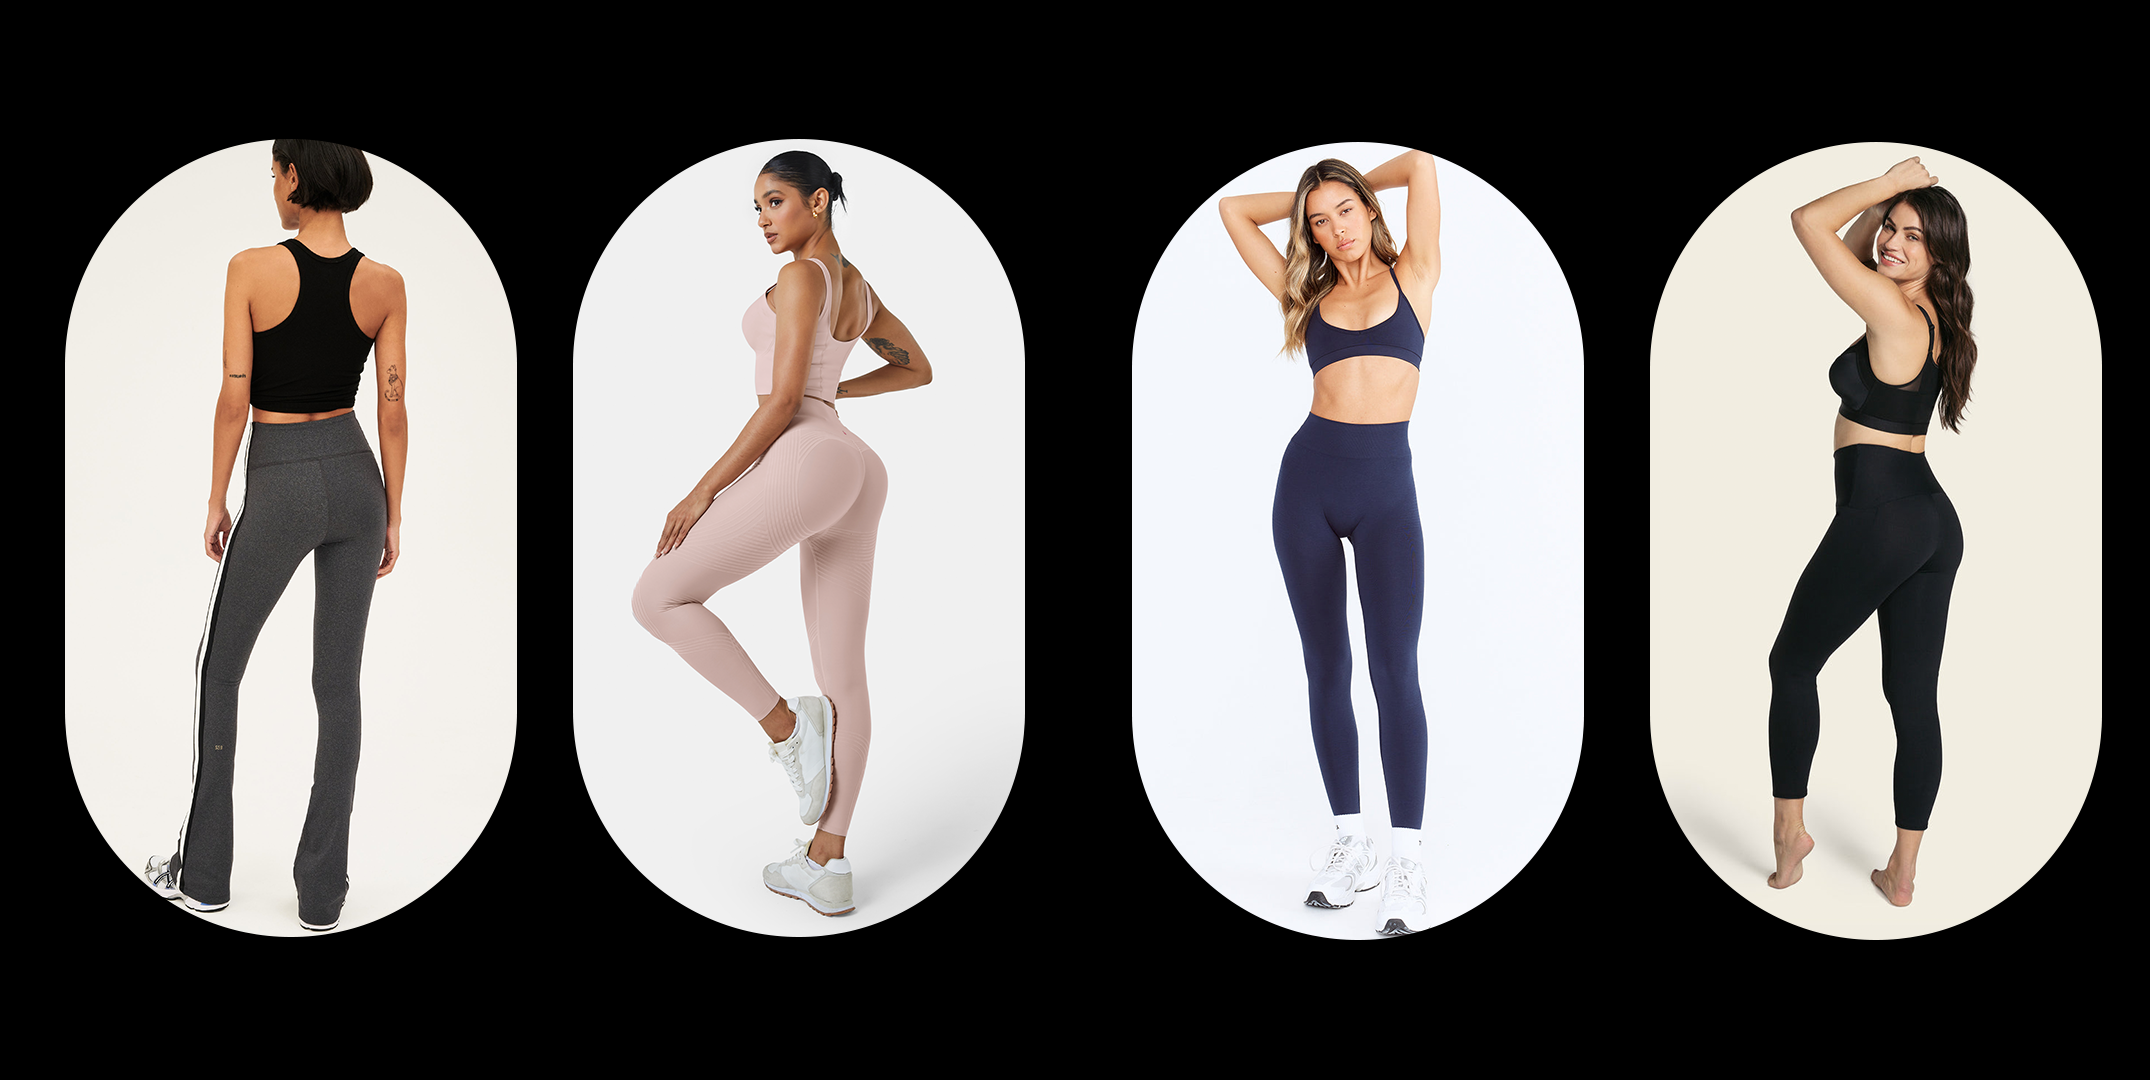 Neutral Supersoft Everyday Sports Leggings